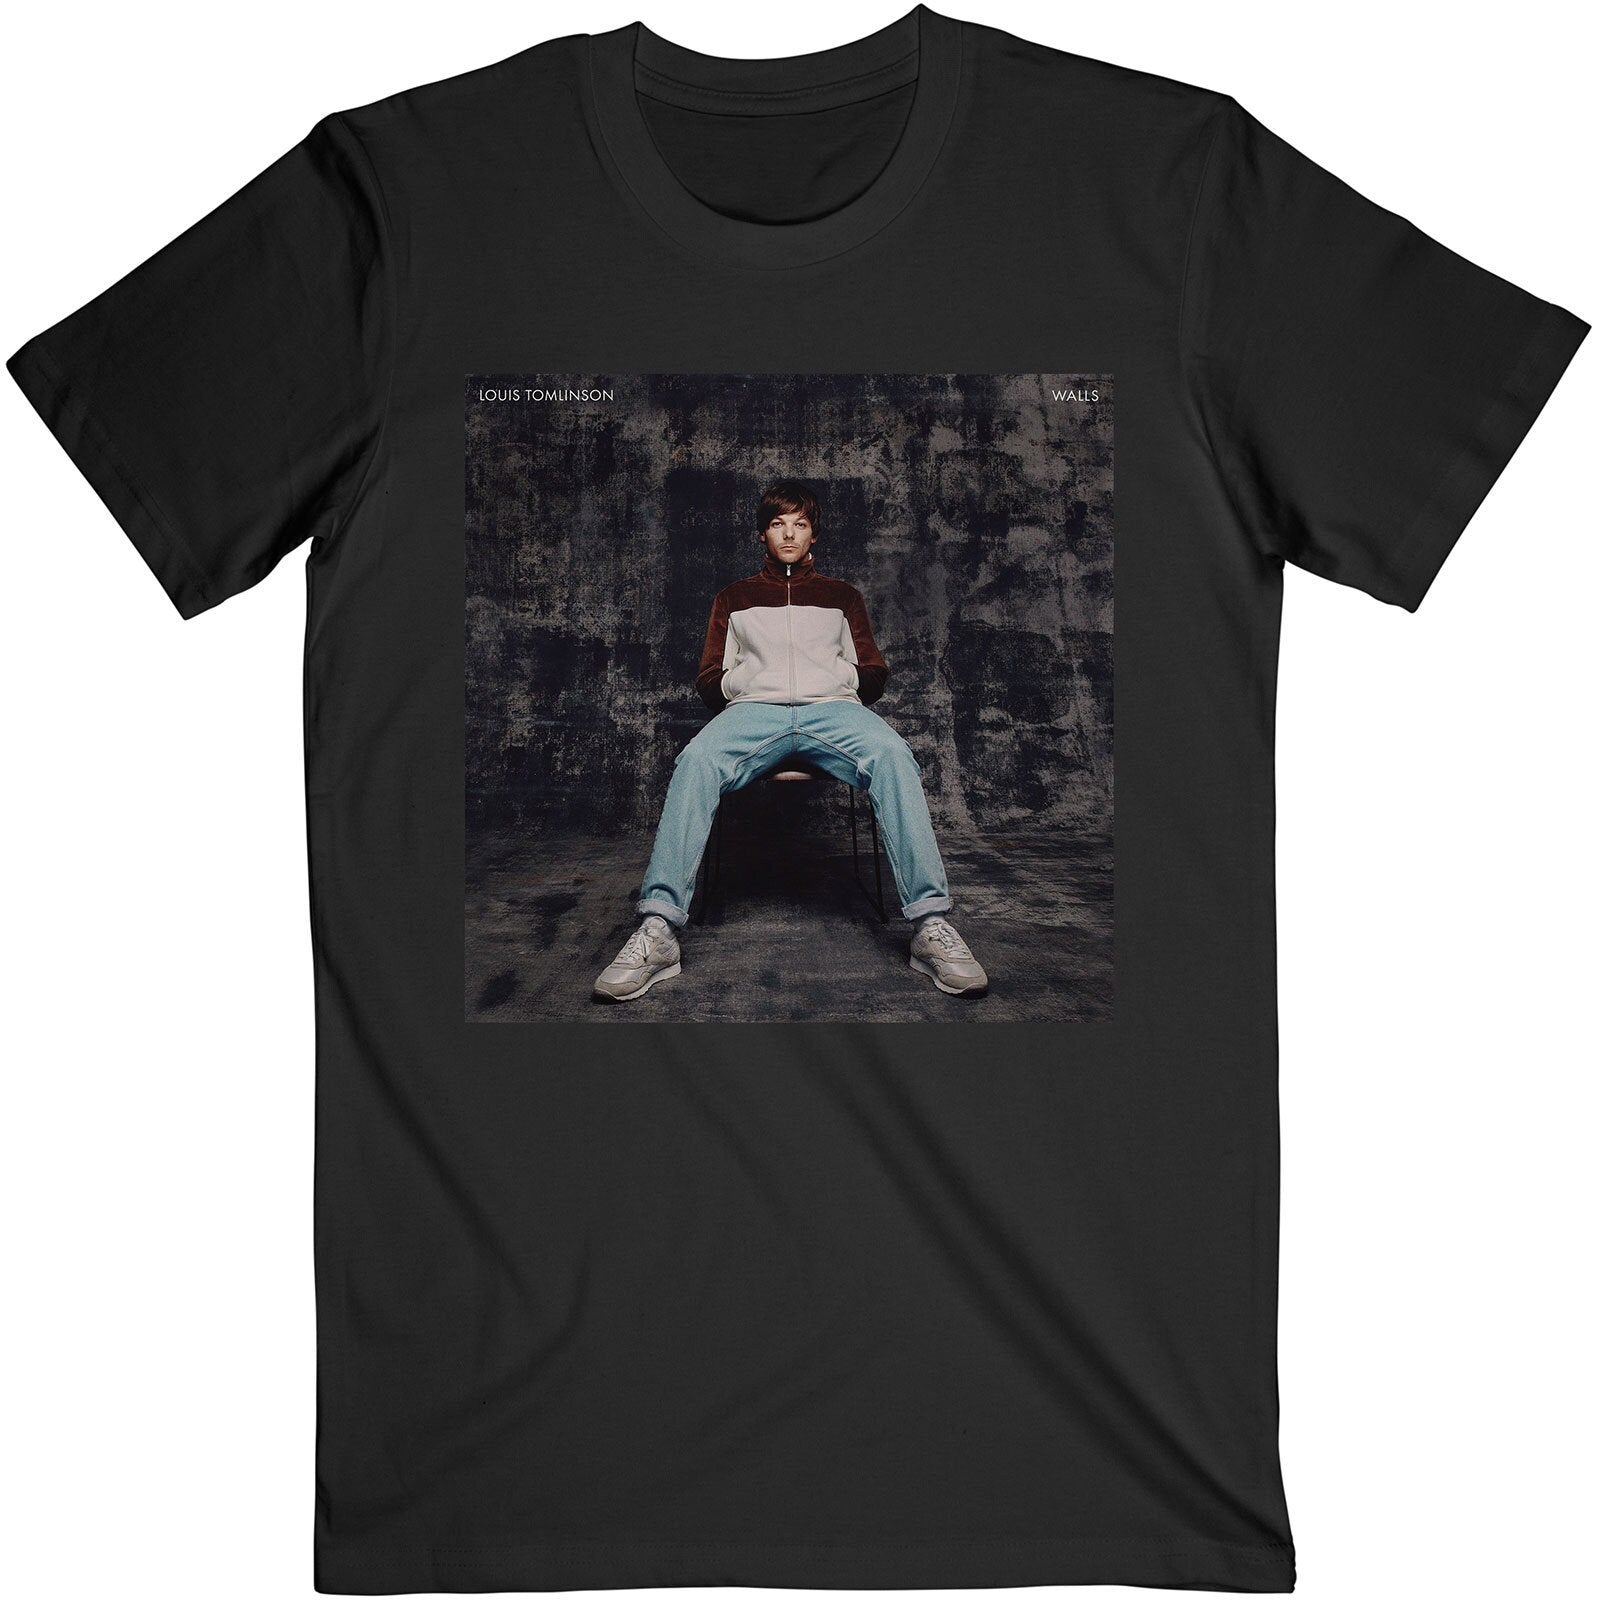 Louis Tomlinson Adult T-Shirt - Walls - Official Licensed Design - Worldwide Shipping - Jelly Frog